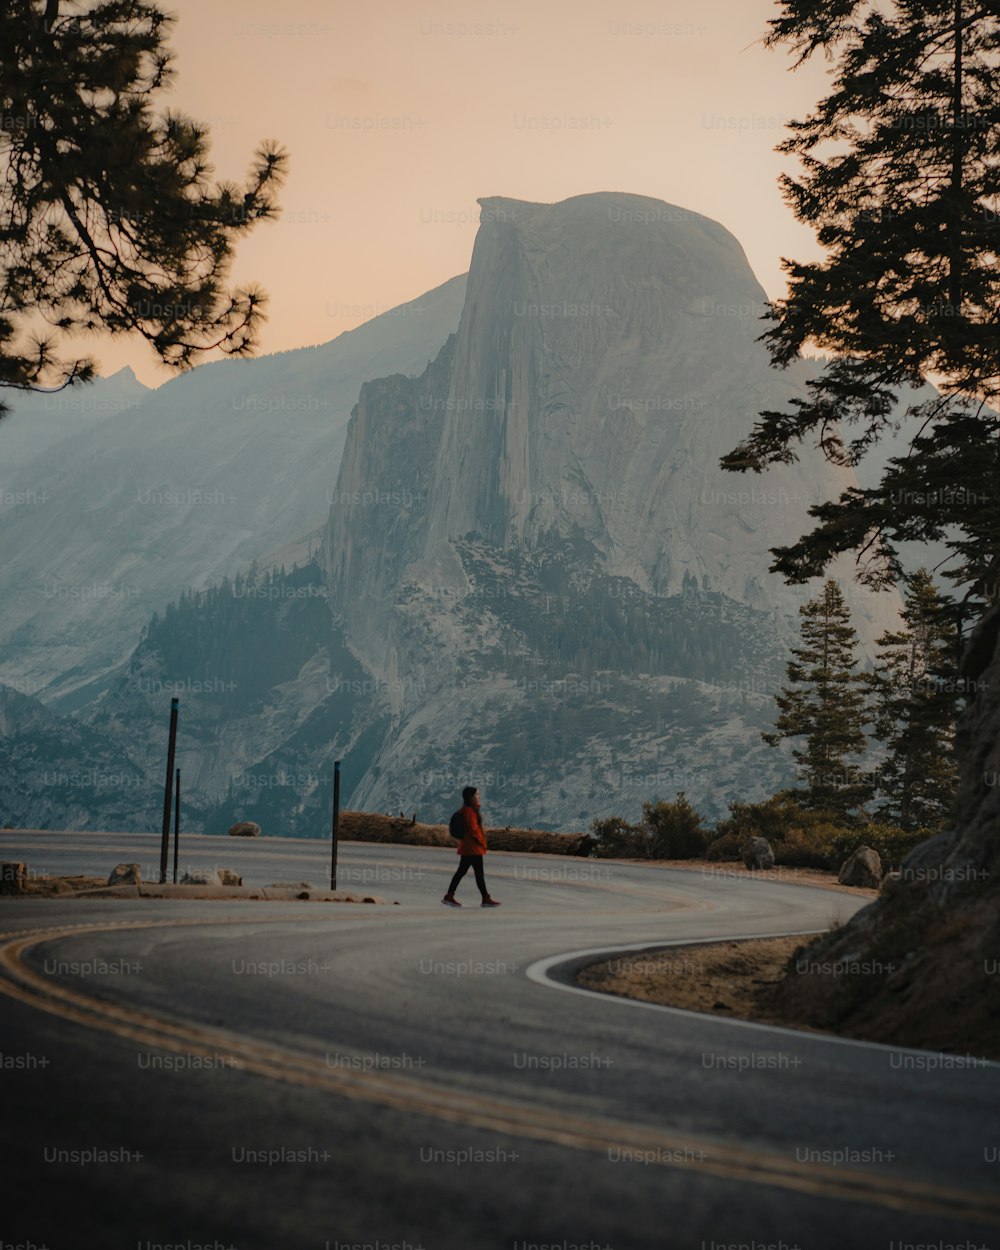 a person walking down a road in front of a mountain